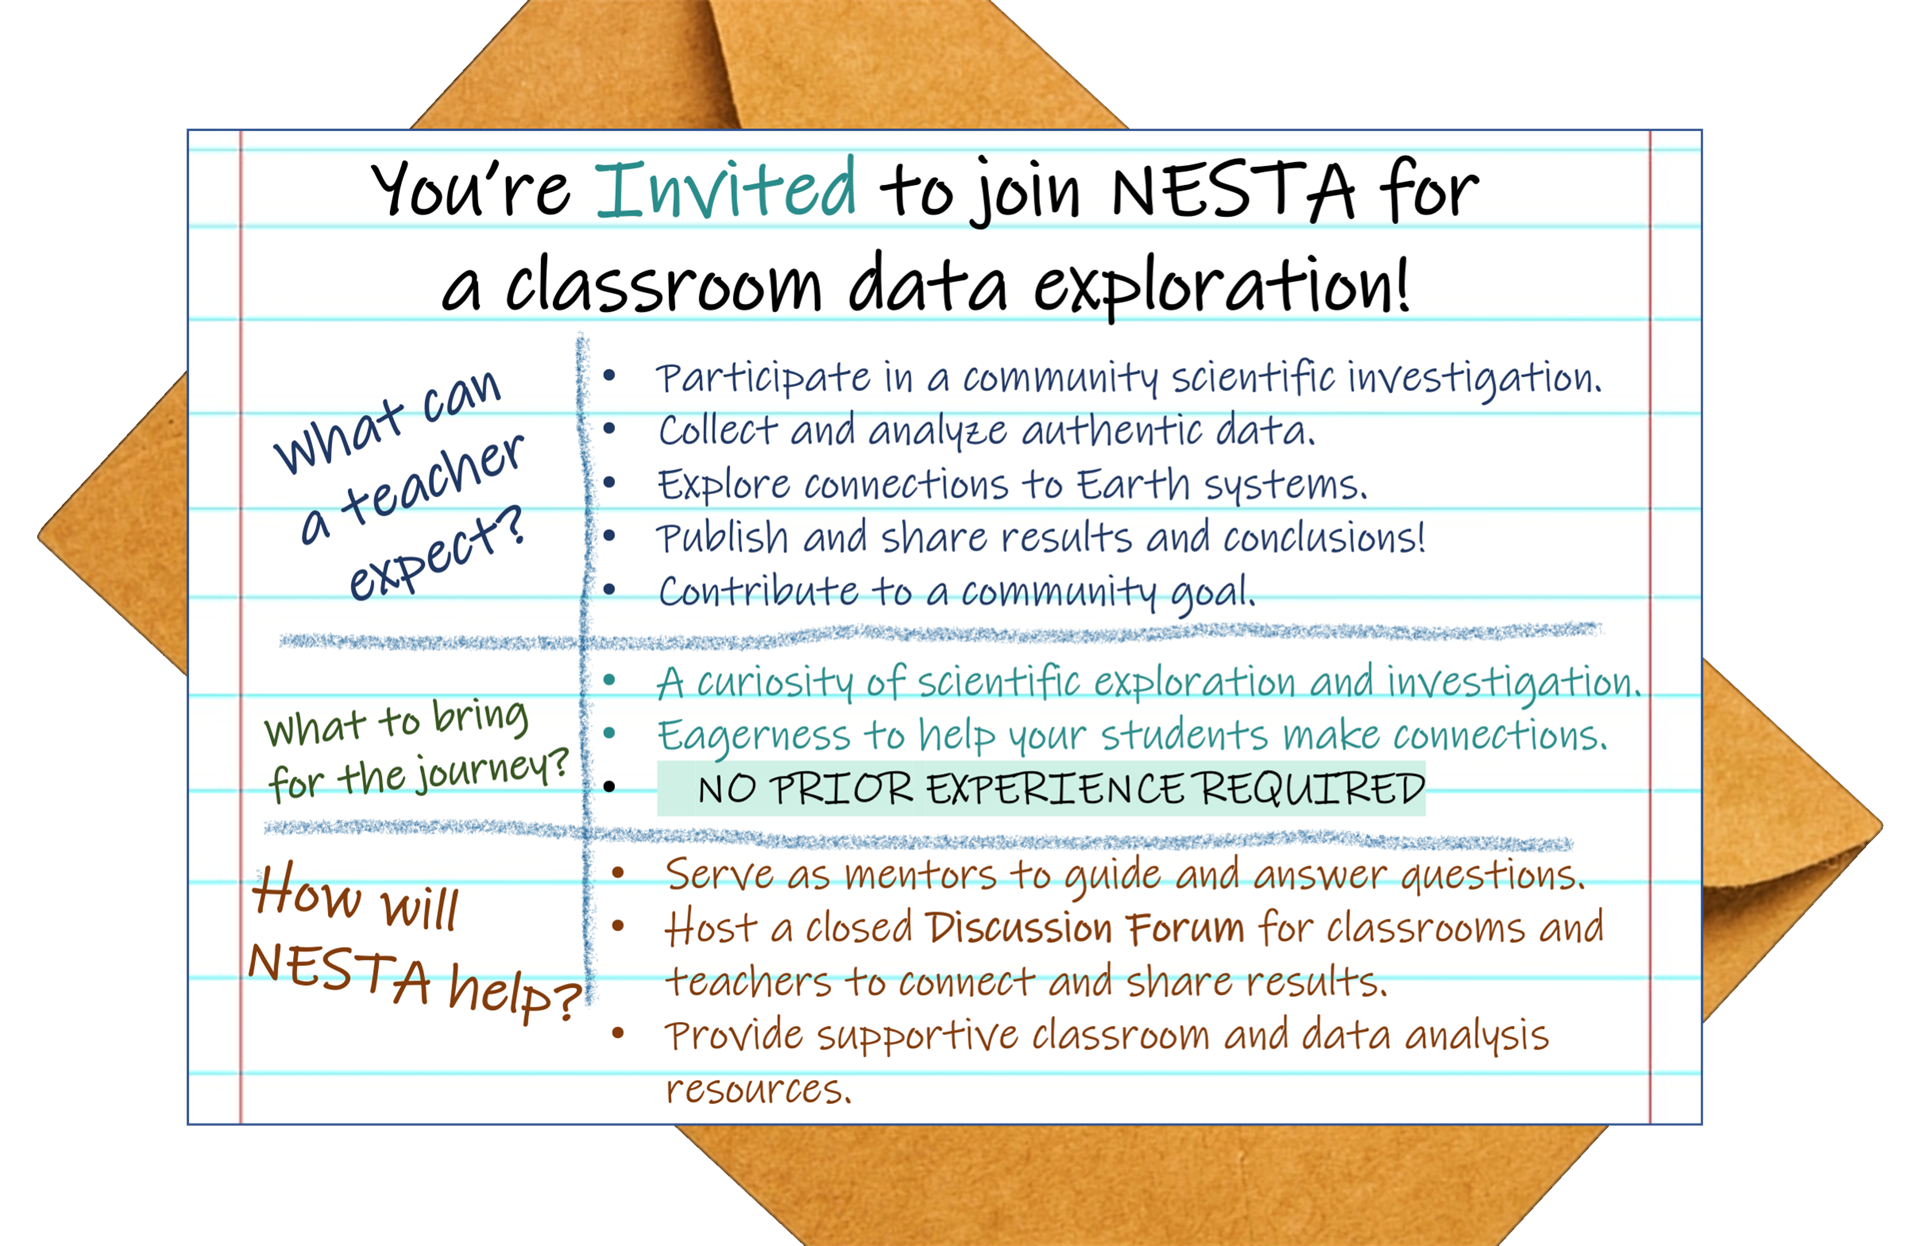 You’re Invited to join NESTA for a classroom data exploration!